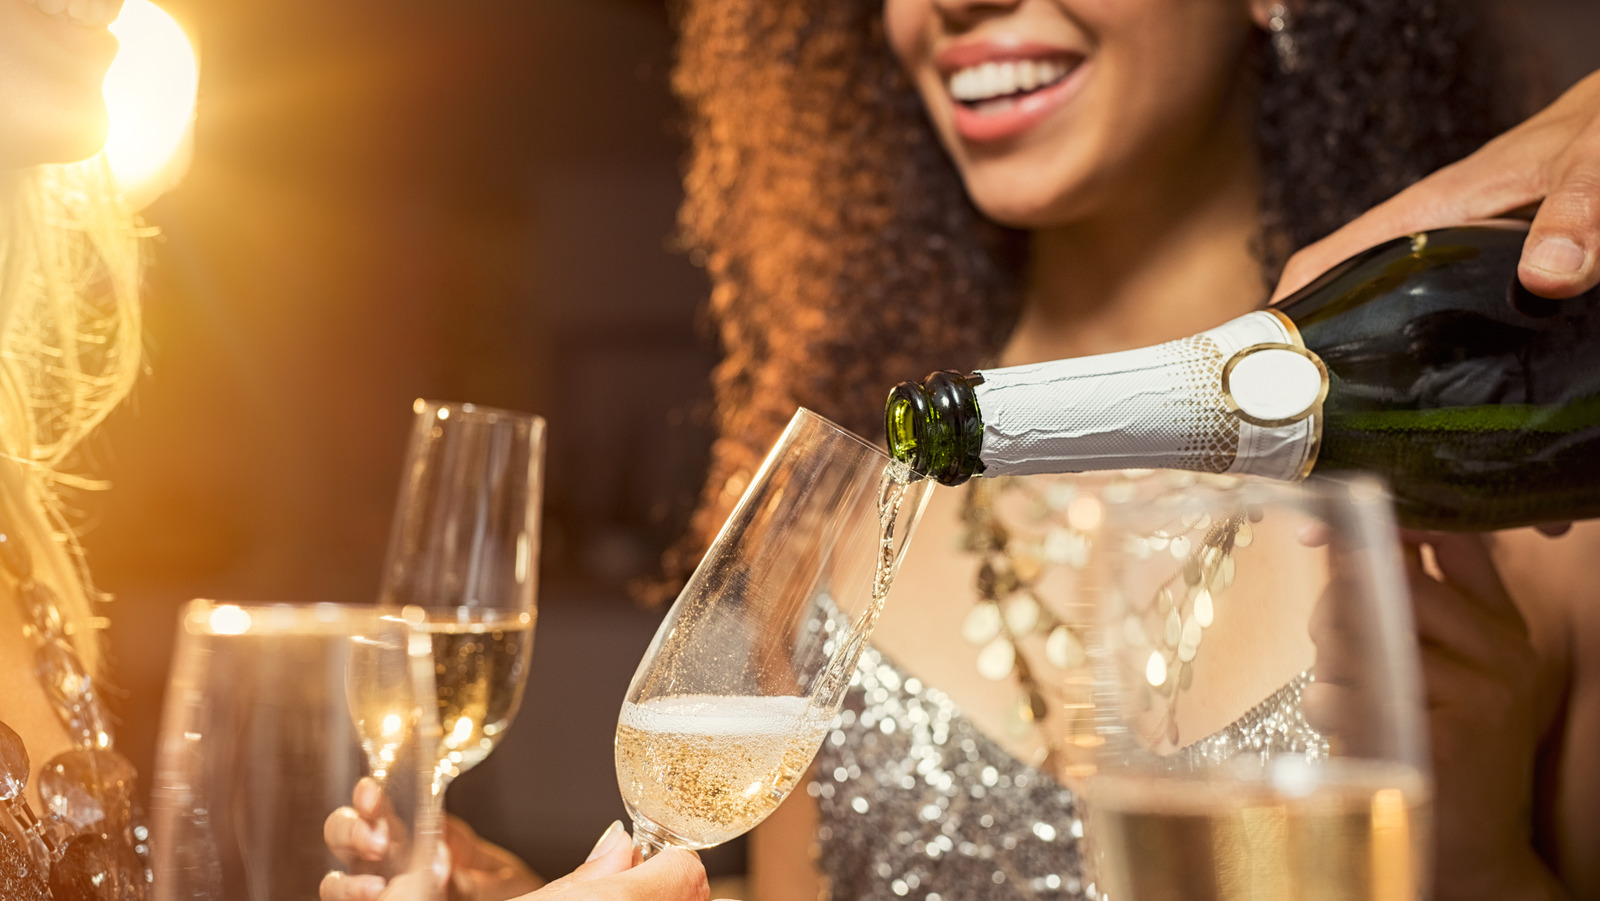 https://www.tastingtable.com/img/gallery/best-sparkling-wines-for-new-years-eve/l-intro-1639752153.jpg